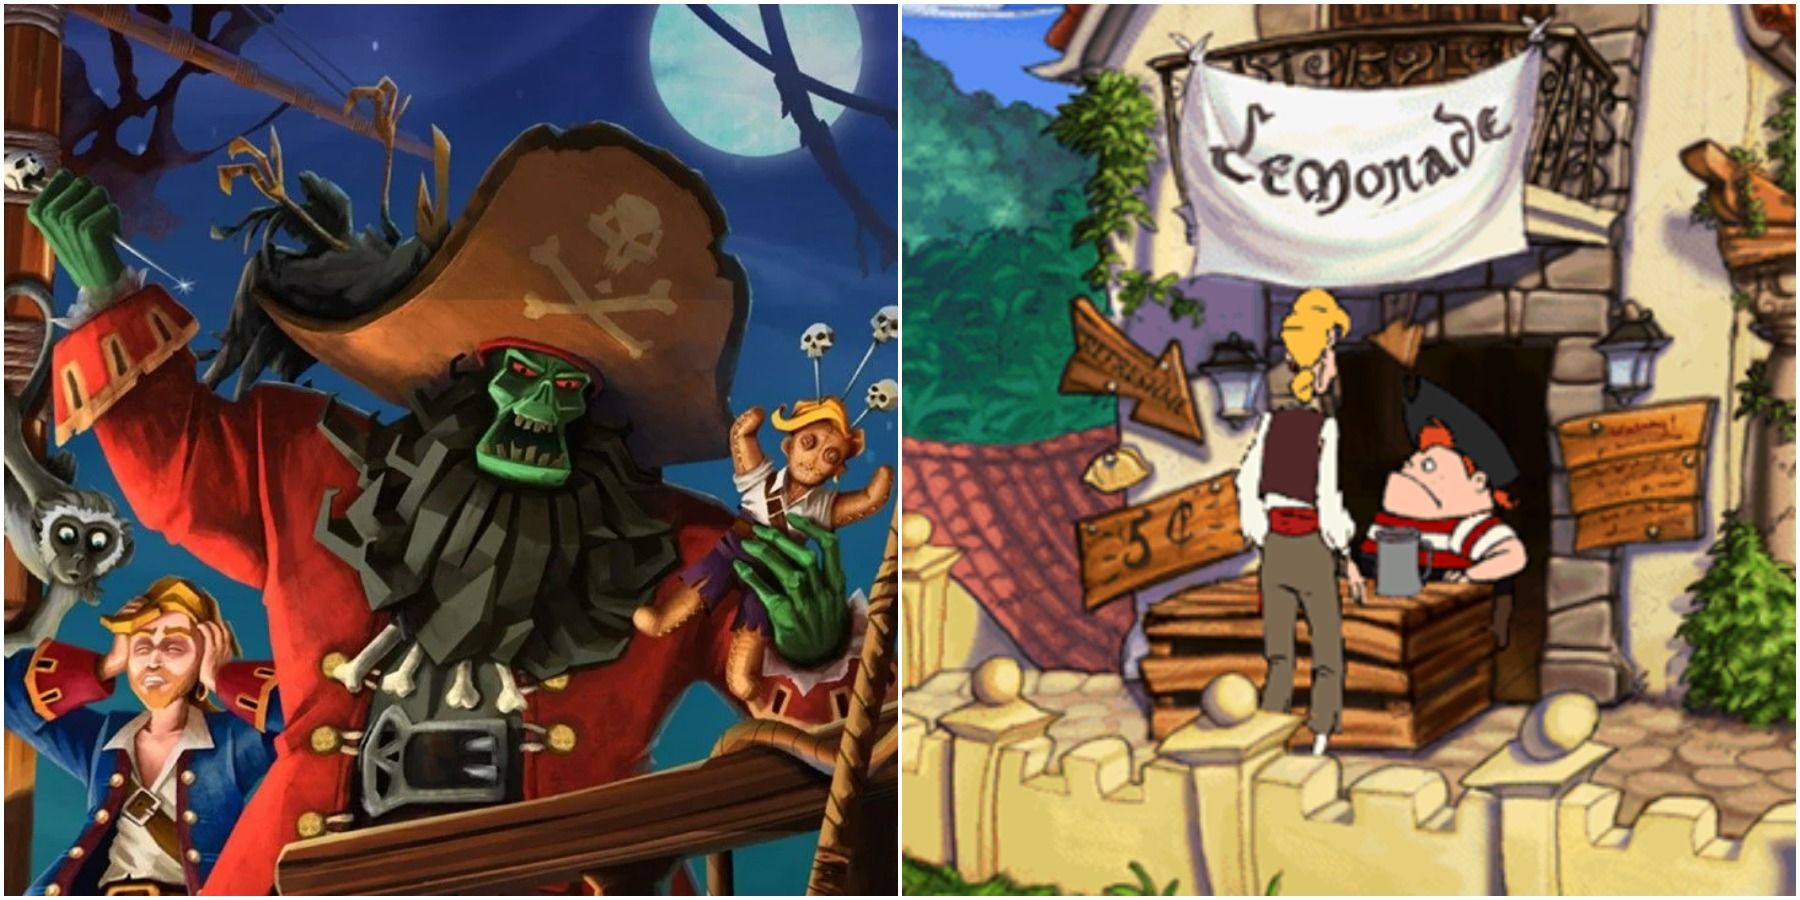 (Left) Cover art for Monkey Island 2 (Right) Guybrush at a Lemonade stand